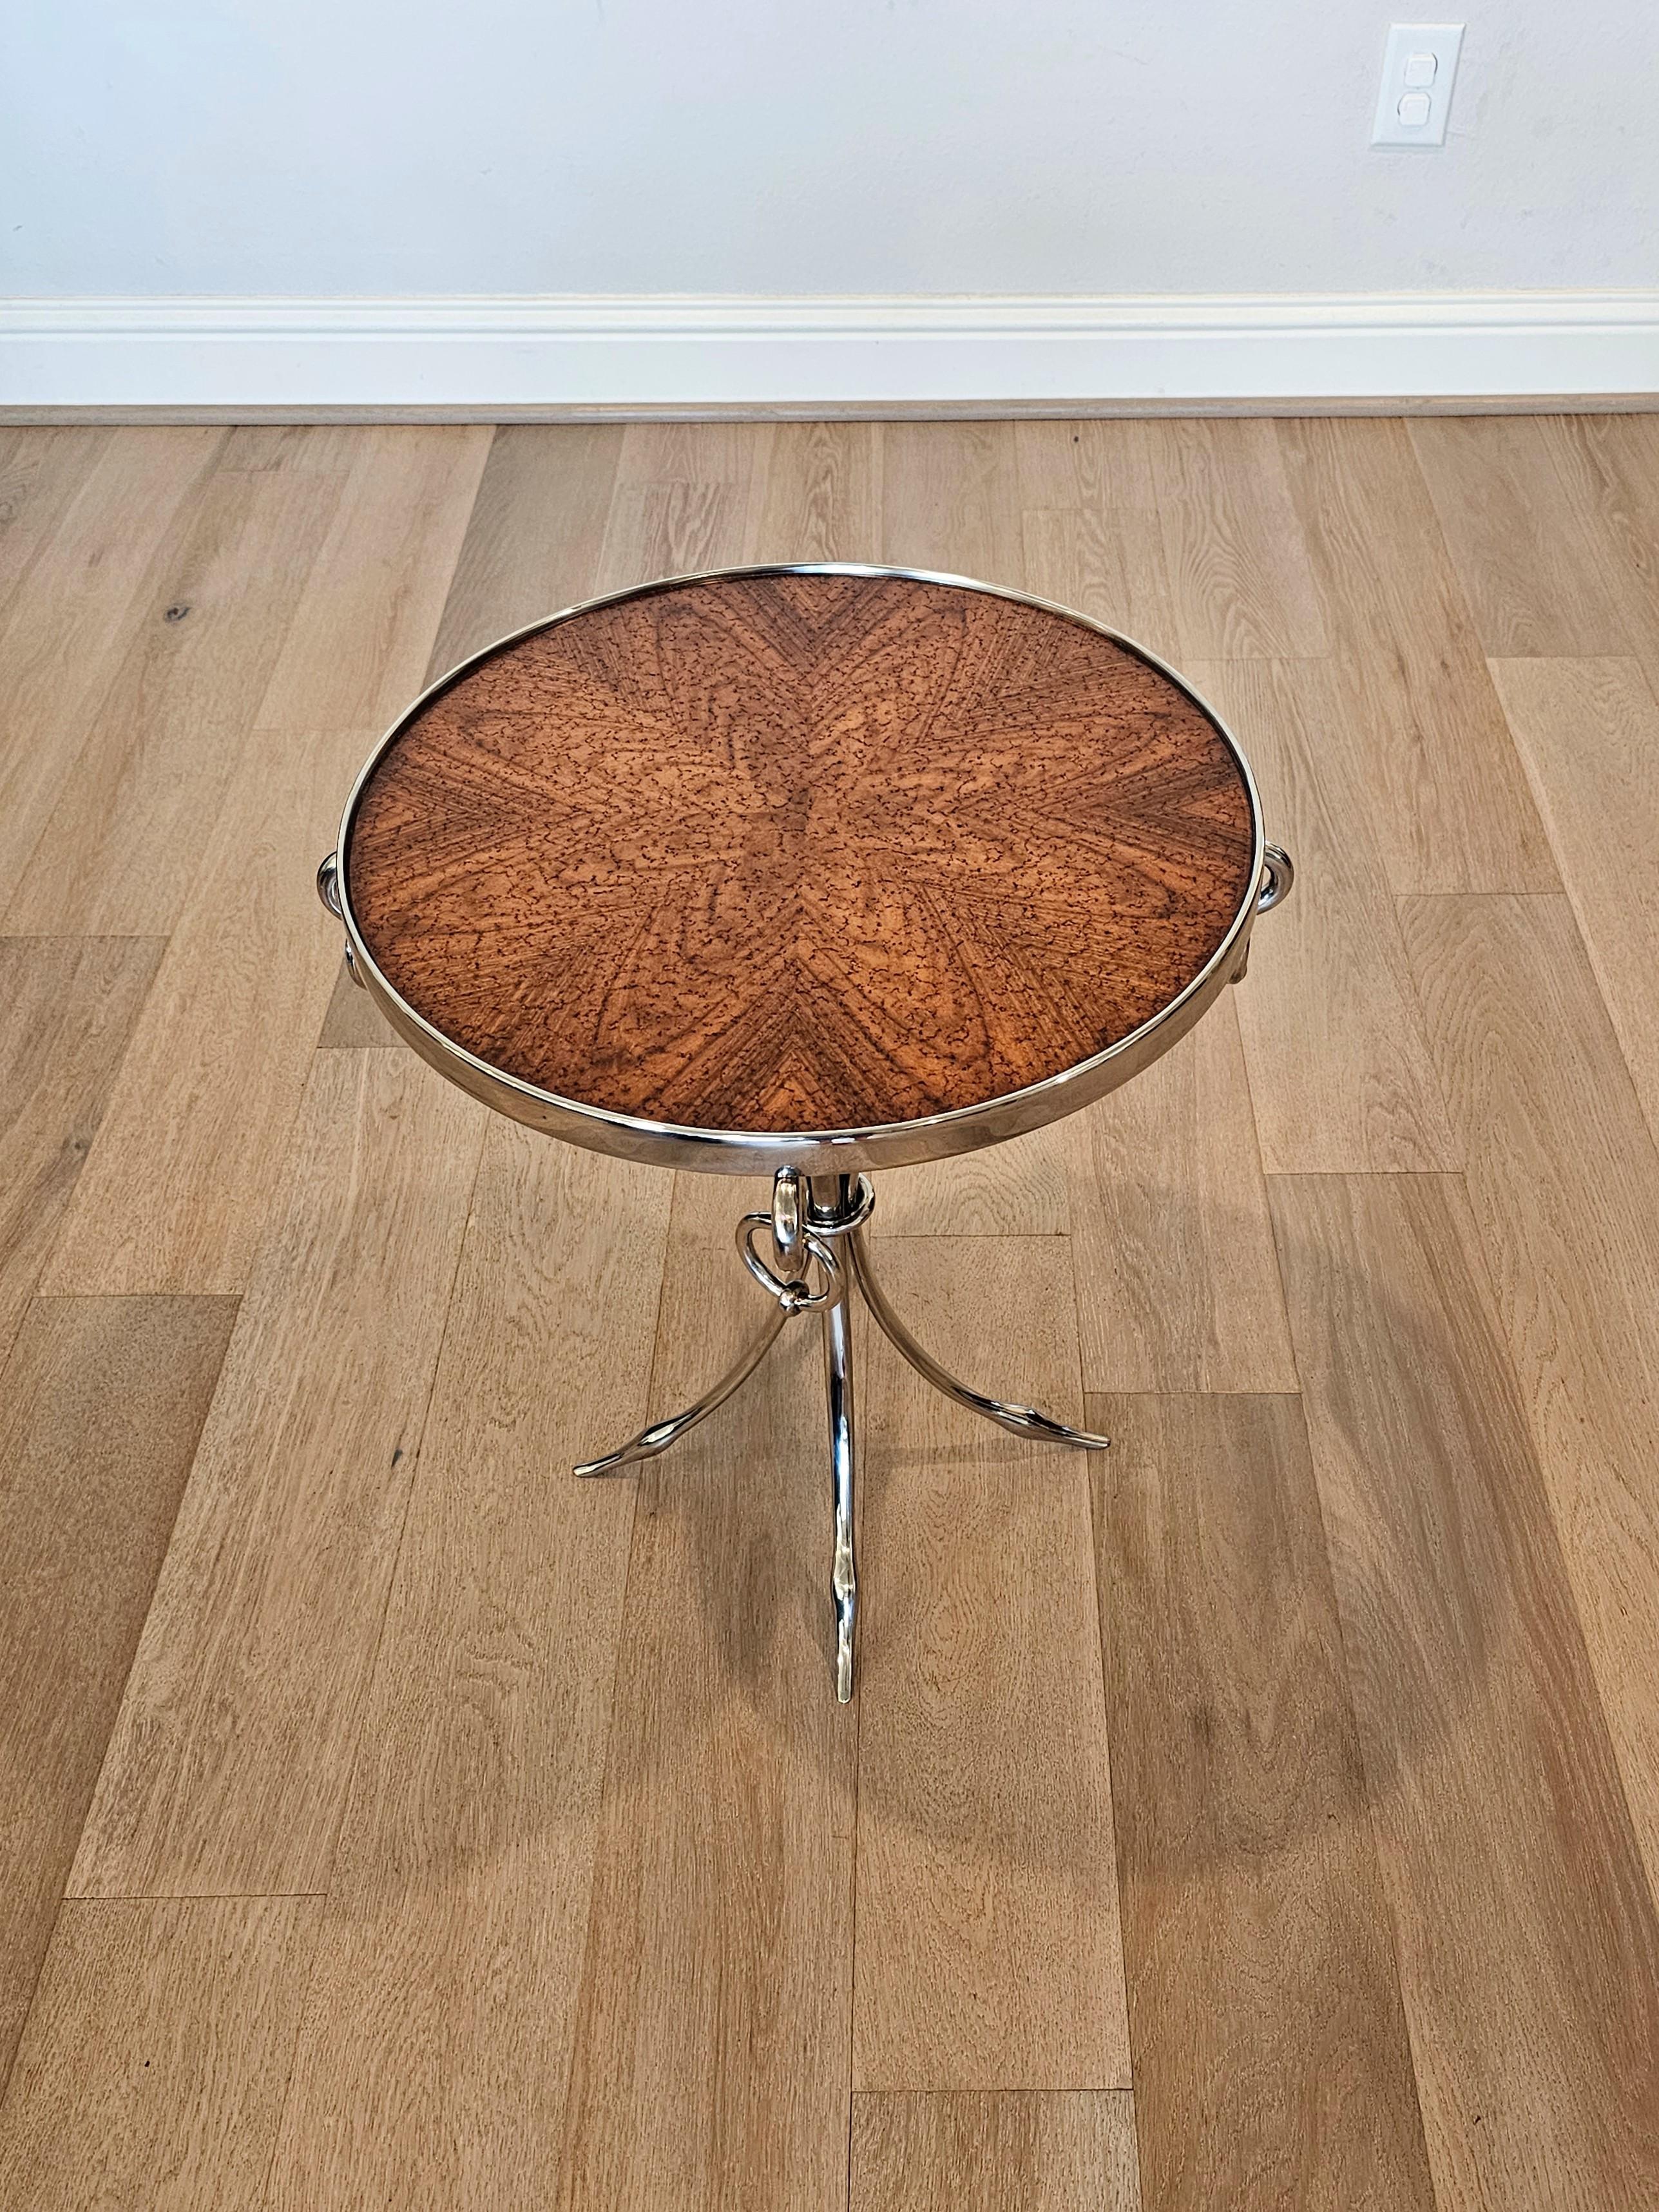 A stunning contemporary Neoclassical modern guéridon side table by fine quality luxury furniture maker Theodore Alexander.

Having a round top with visually striking radiating matched burl wood top, high quality polished chromed base with ring